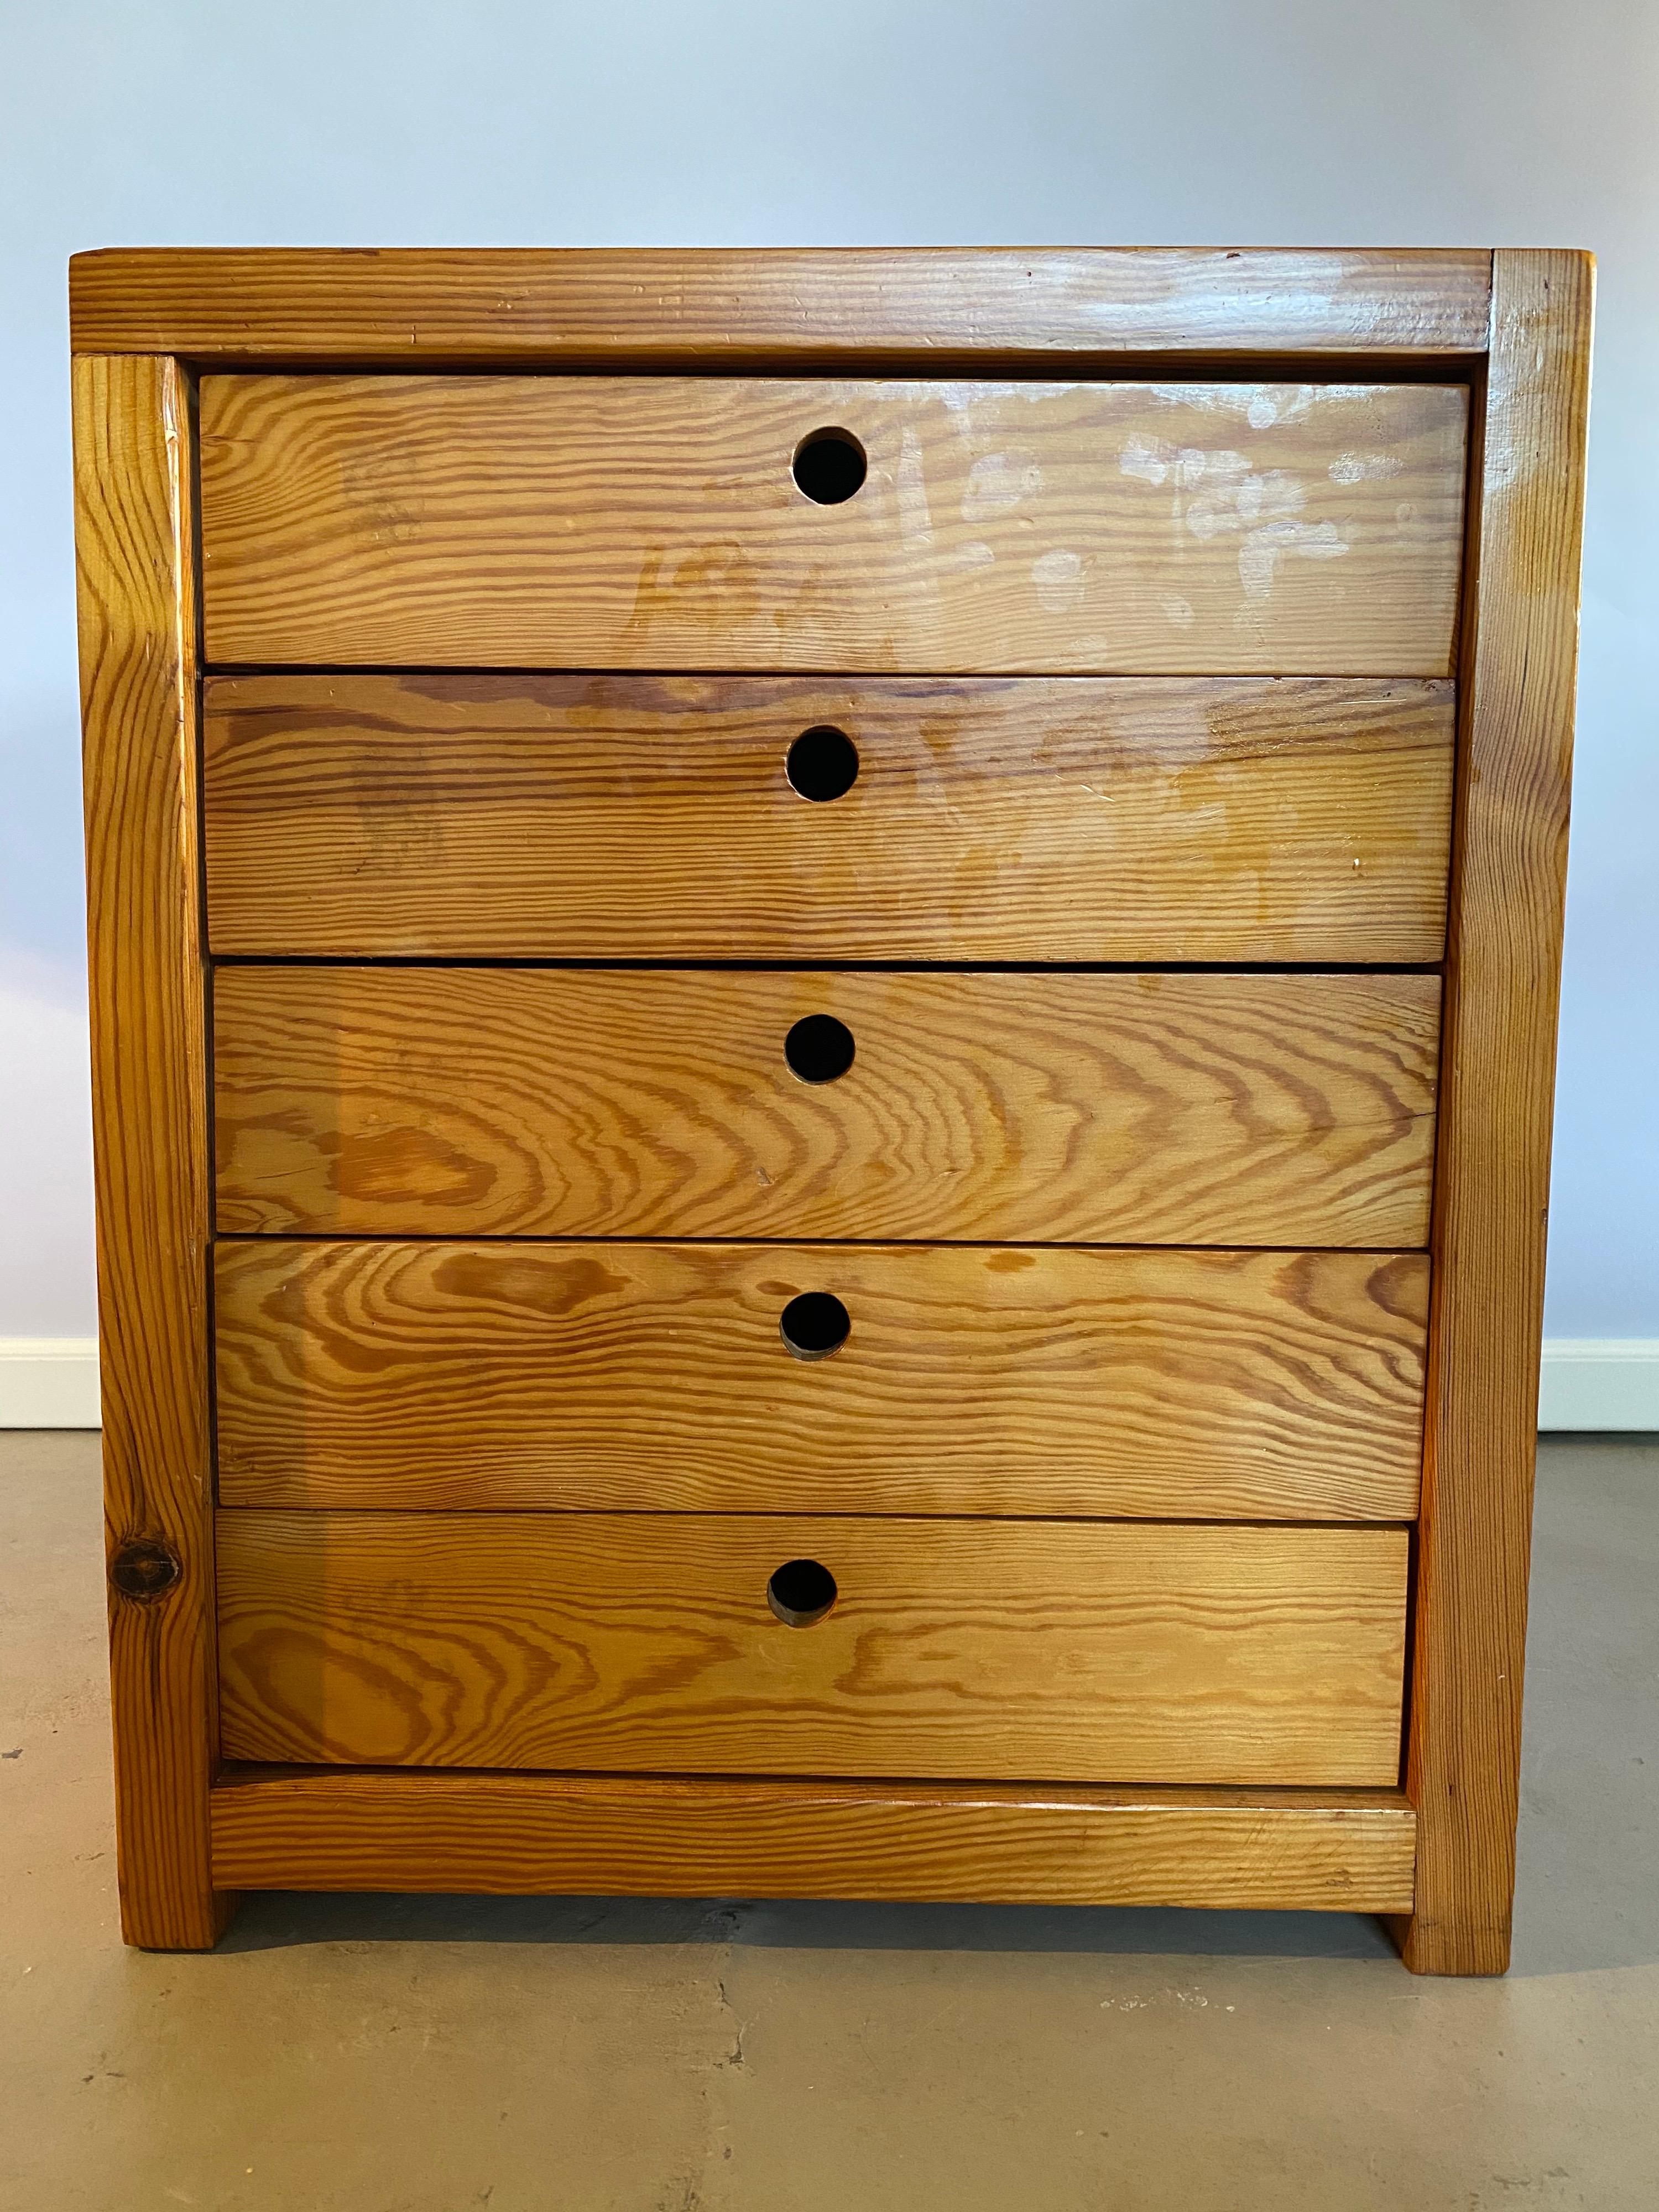 Beautiful commode or chest of drawers made in pine by Ate Van Apeldoorn. Notice the distinctive dove tail joints and the all-over shaker style craftsmanship of his furniture. In very good condition, all the drawers open and close smoothly.